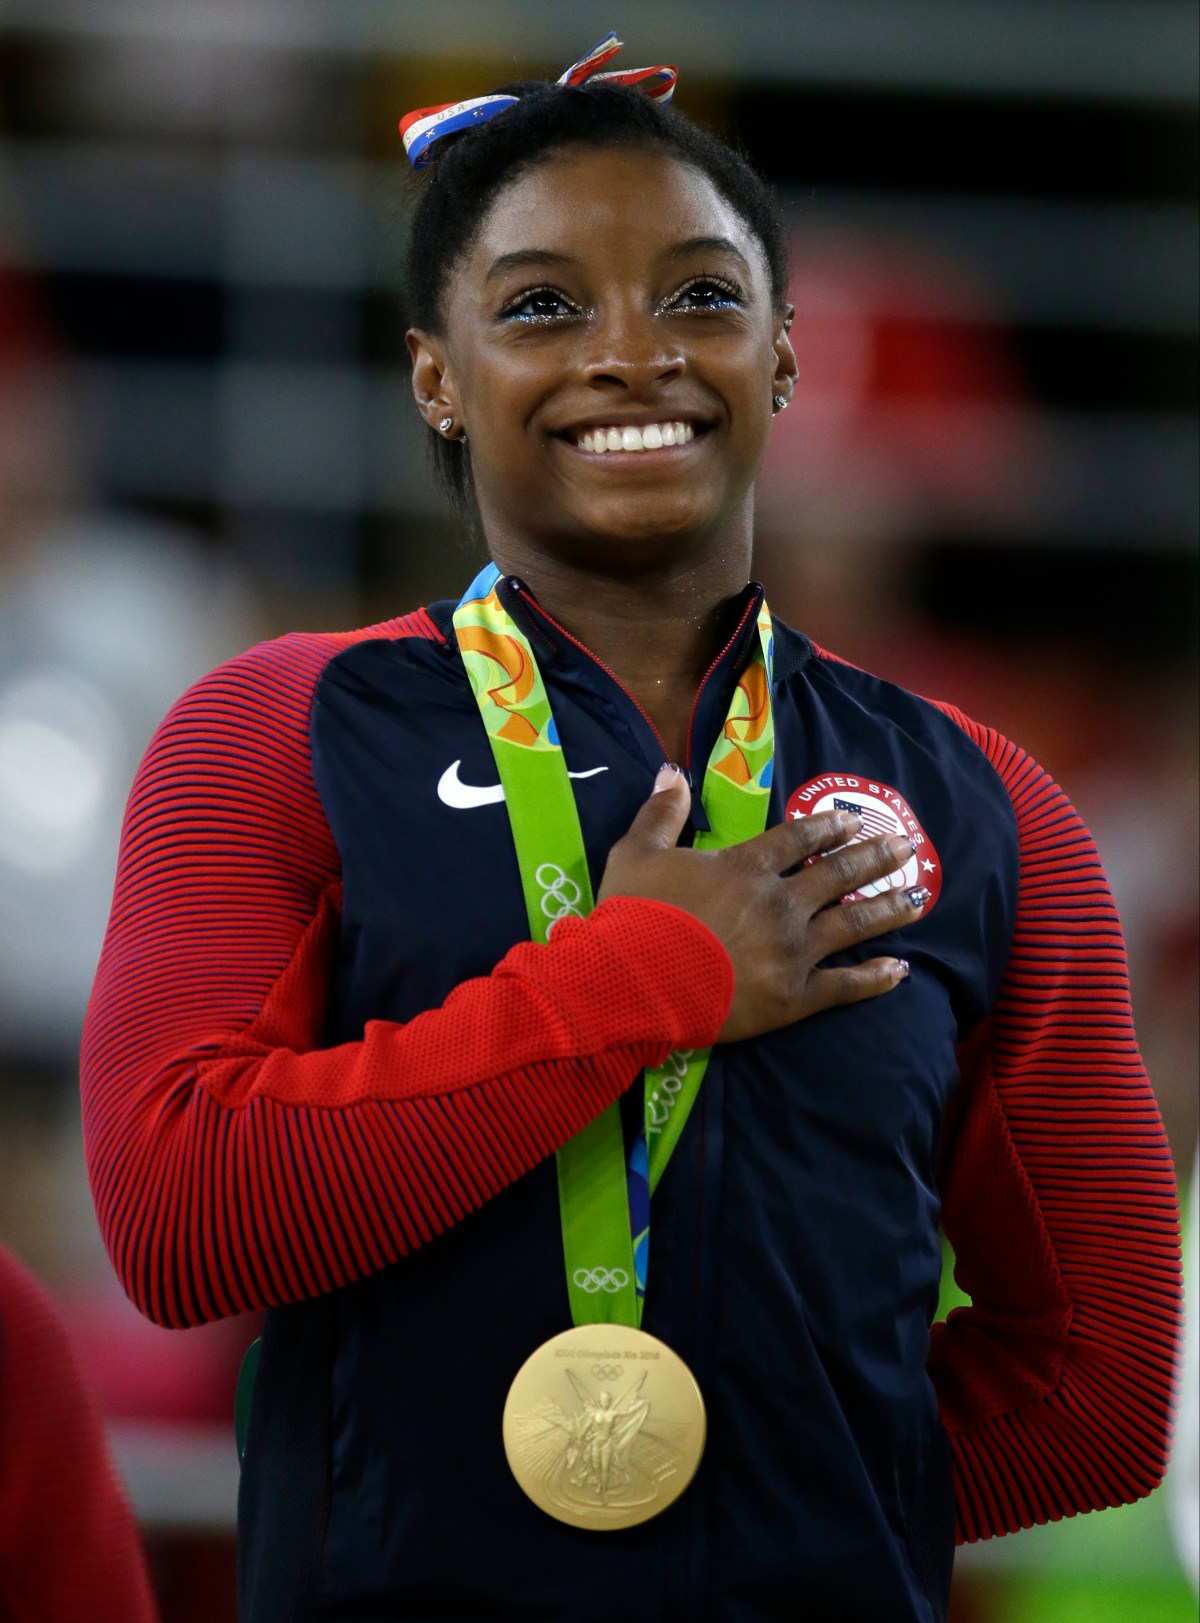 FILE - In this Aug. 16, 2016, file photo, United States' Simone Biles stands during the national anthem after winning the gold medal in the women's floor exercise at the 2016 Summer Olympics in Rio de Janeiro, Brazil. Confidential medical data of gold medal-winning gymnast Simone Biles, seven-time Grand Slam champion Venus Williams and other female U.S. Olympians was hacked from a World Anti-Doping Agency database and posted online Tuesday, Sept. 13, 2016. WADA said the hackers were a "Russian cyber espionage group" called Fancy Bears. (AP Photo/Rebecca Blackwell, File)